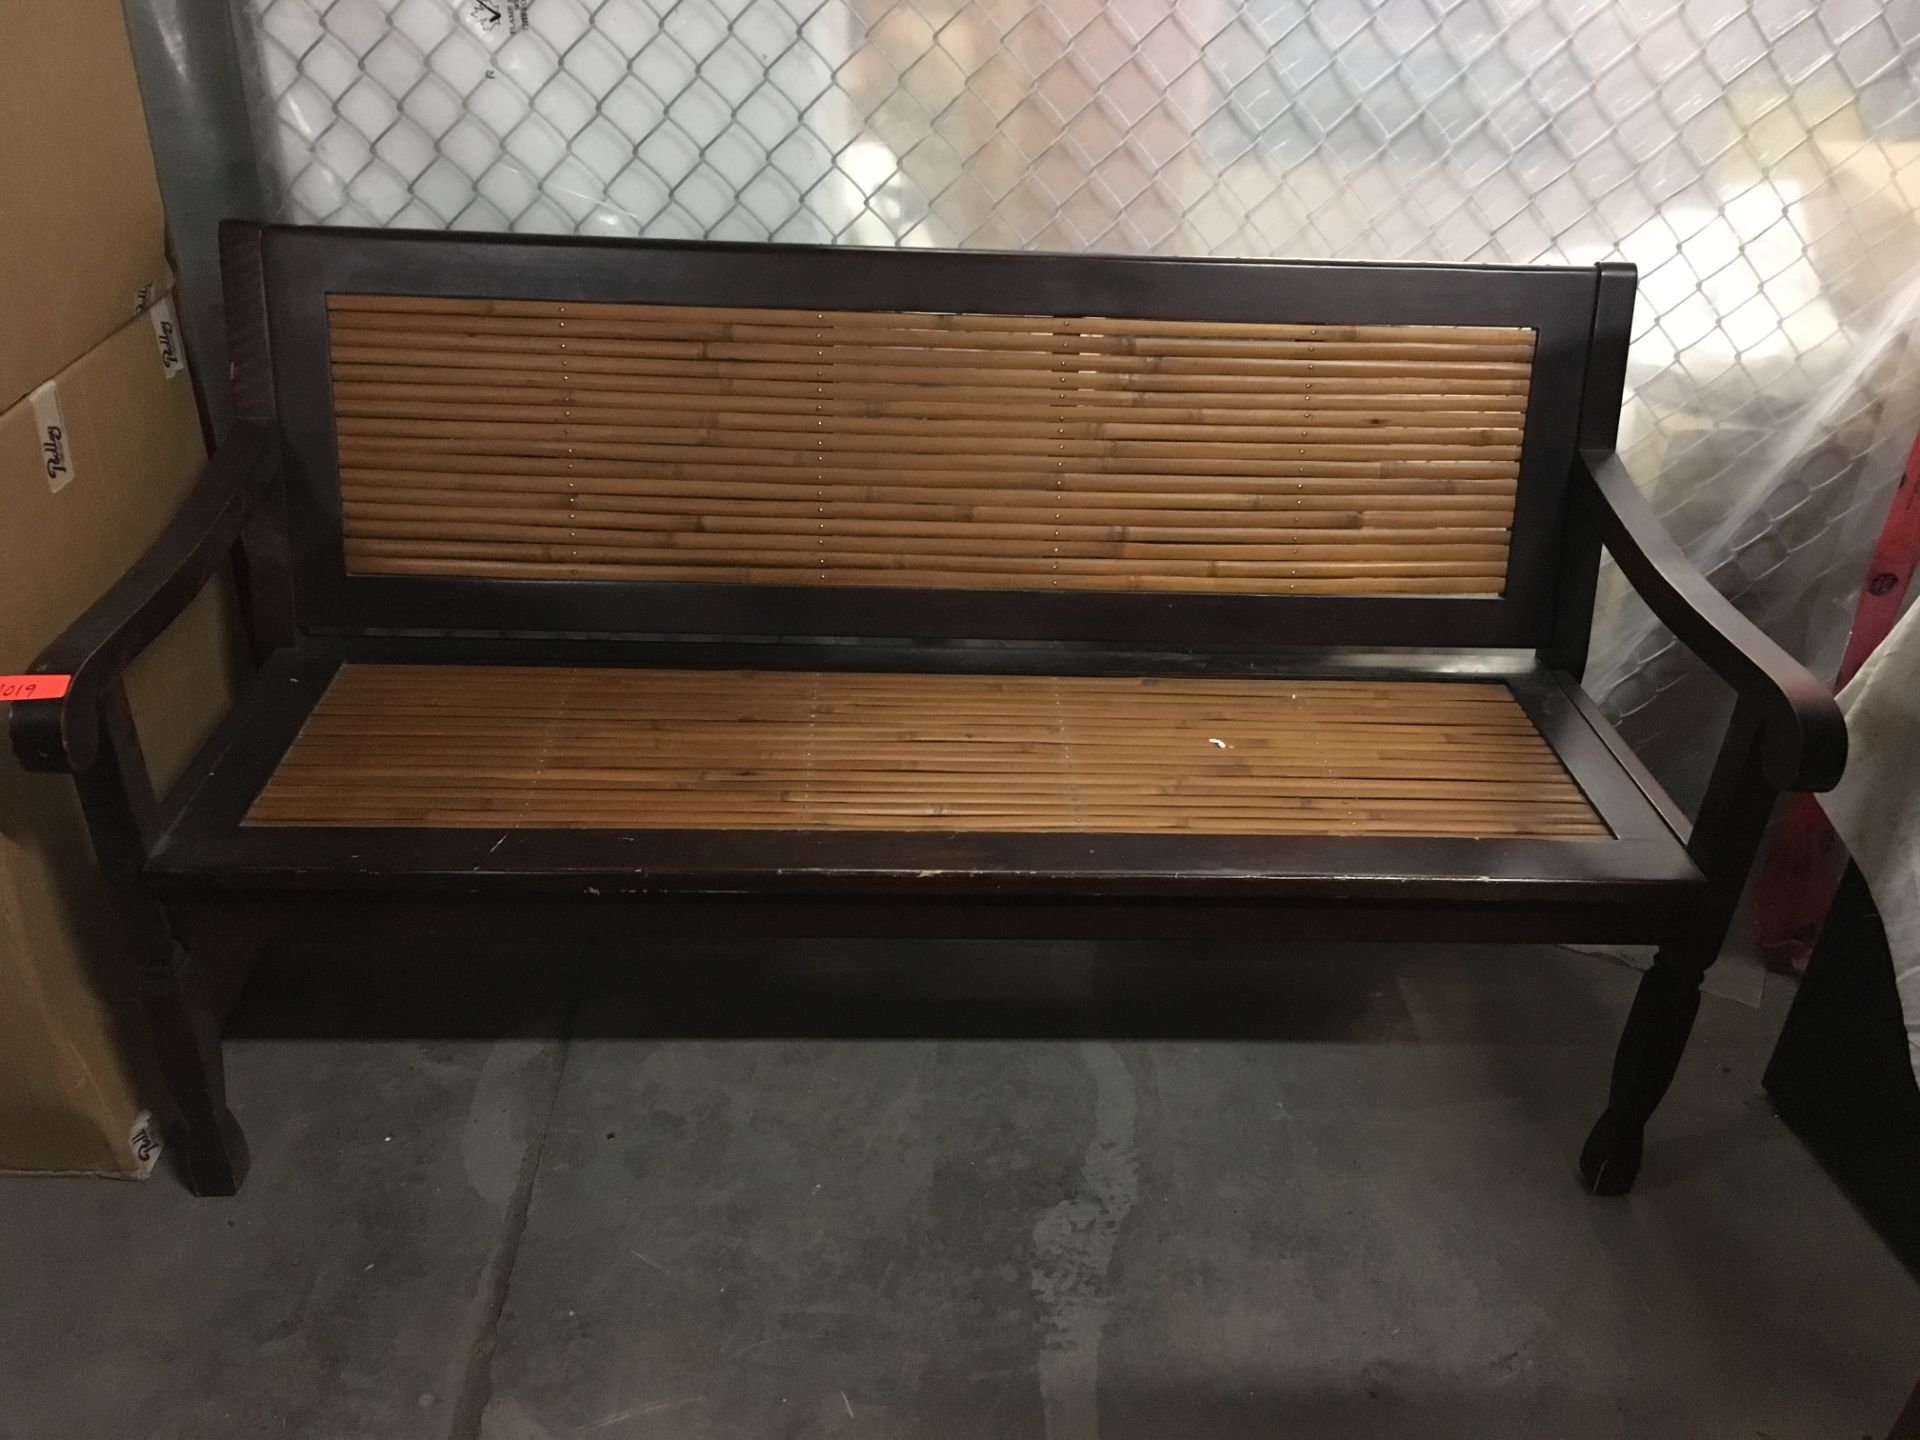 Bamboo Sytle Waiting Bench - 62" - Image 2 of 2